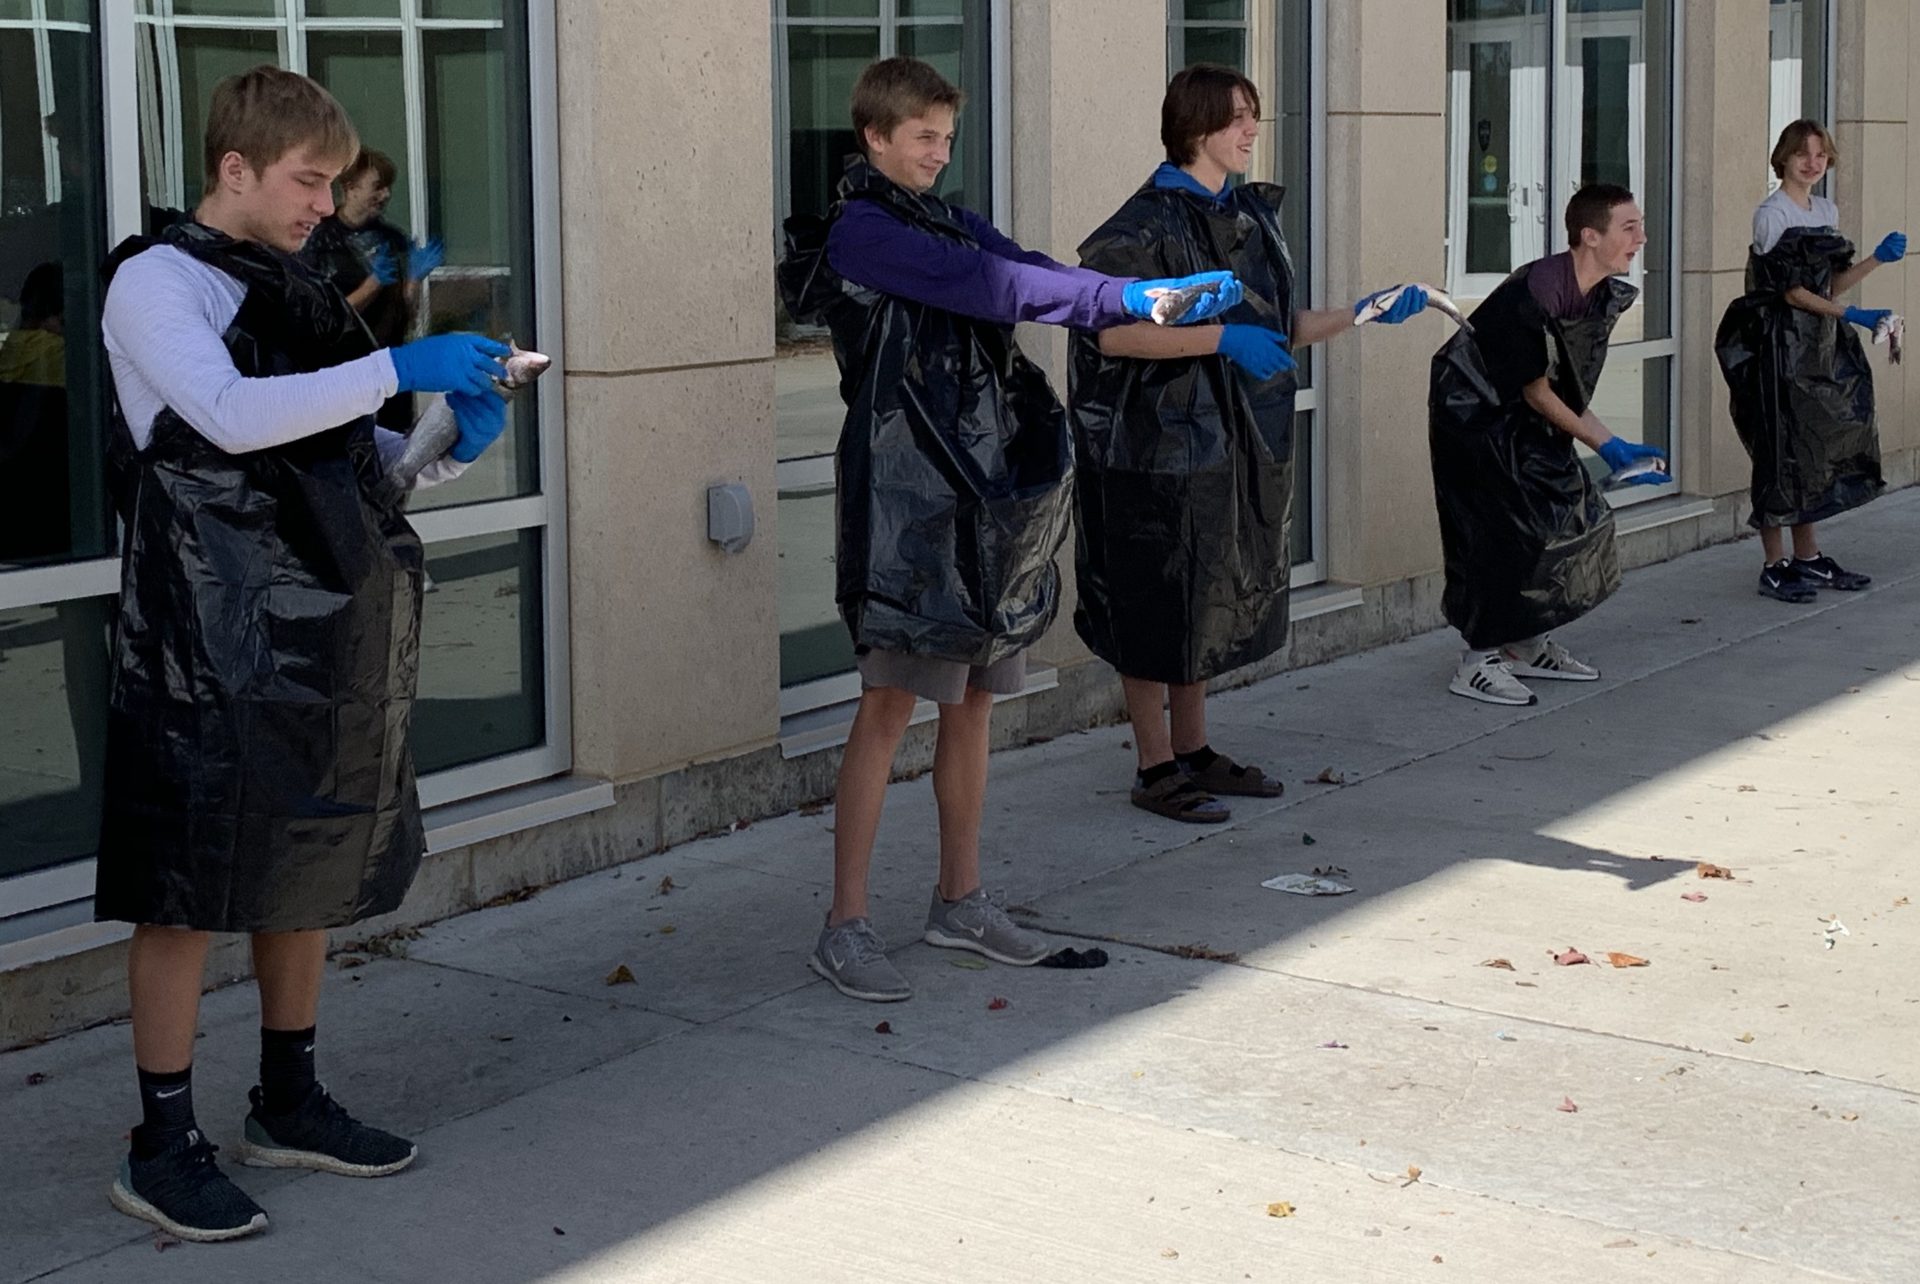 Students stand in the courtyard dressed in black garbage bags tossing fish.